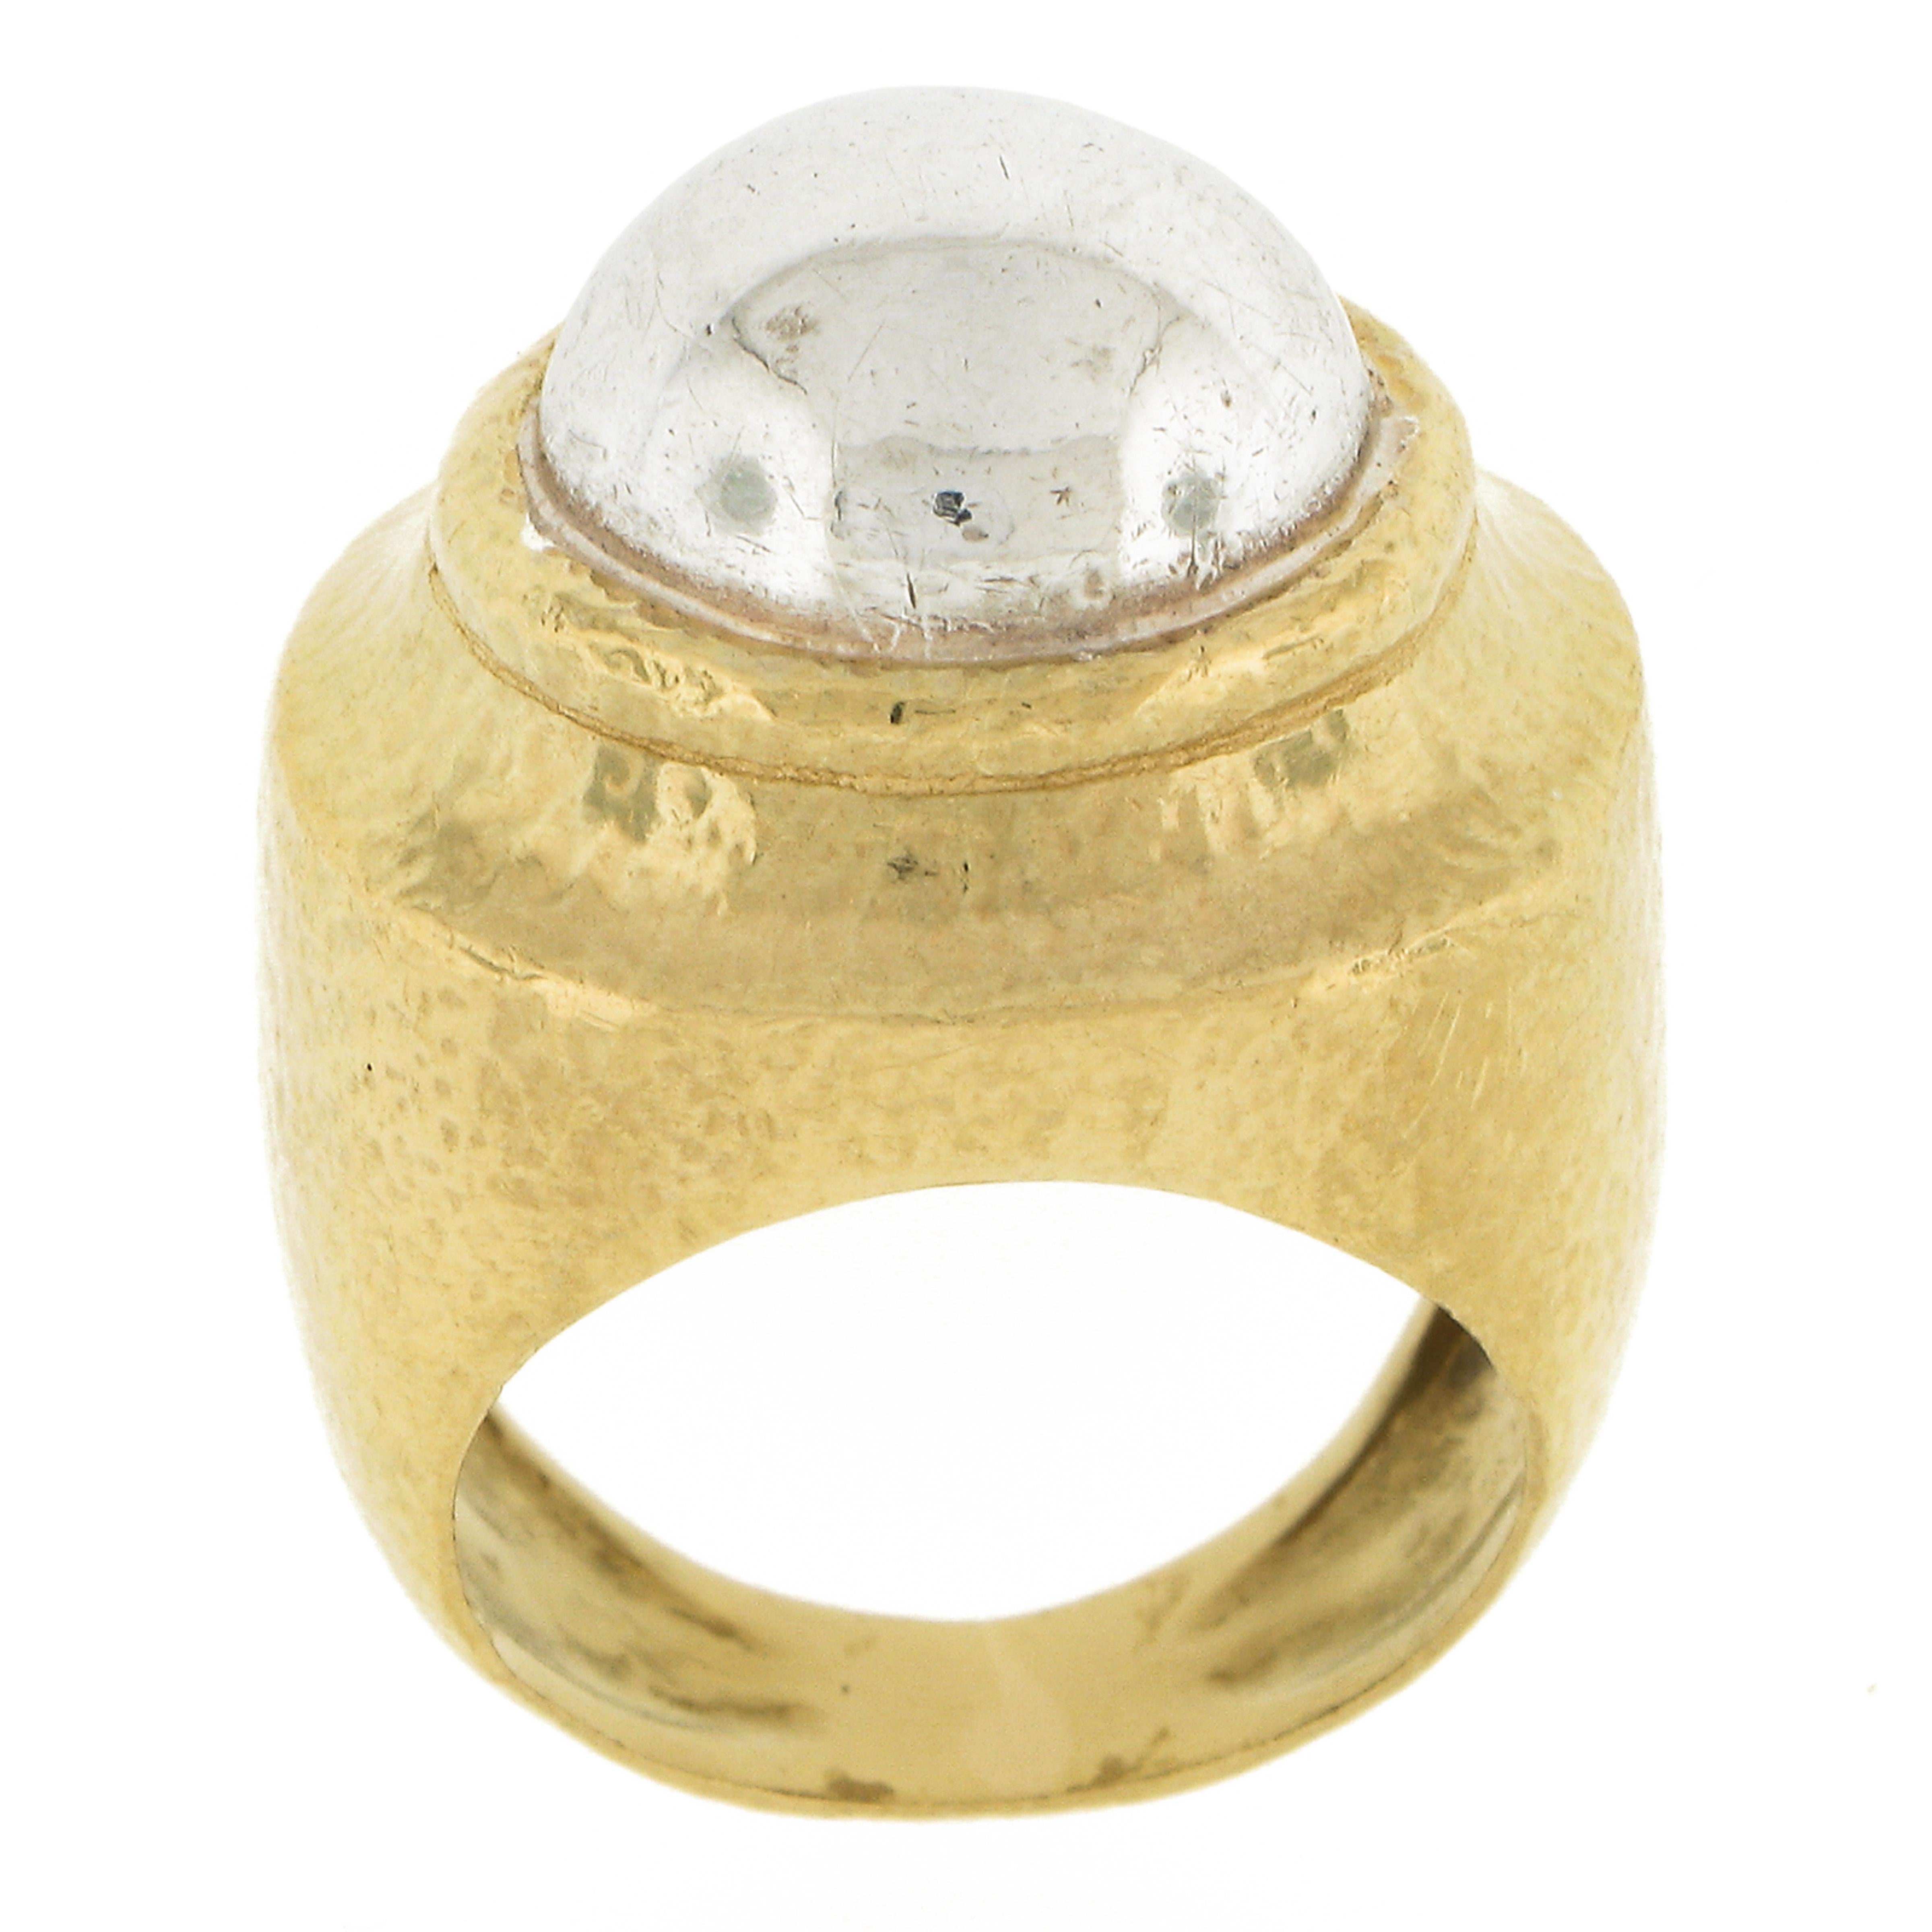 Zolotas 22k Yellow Gold & Silver Center Hammered Finish Statement Cocktail Ring For Sale 4